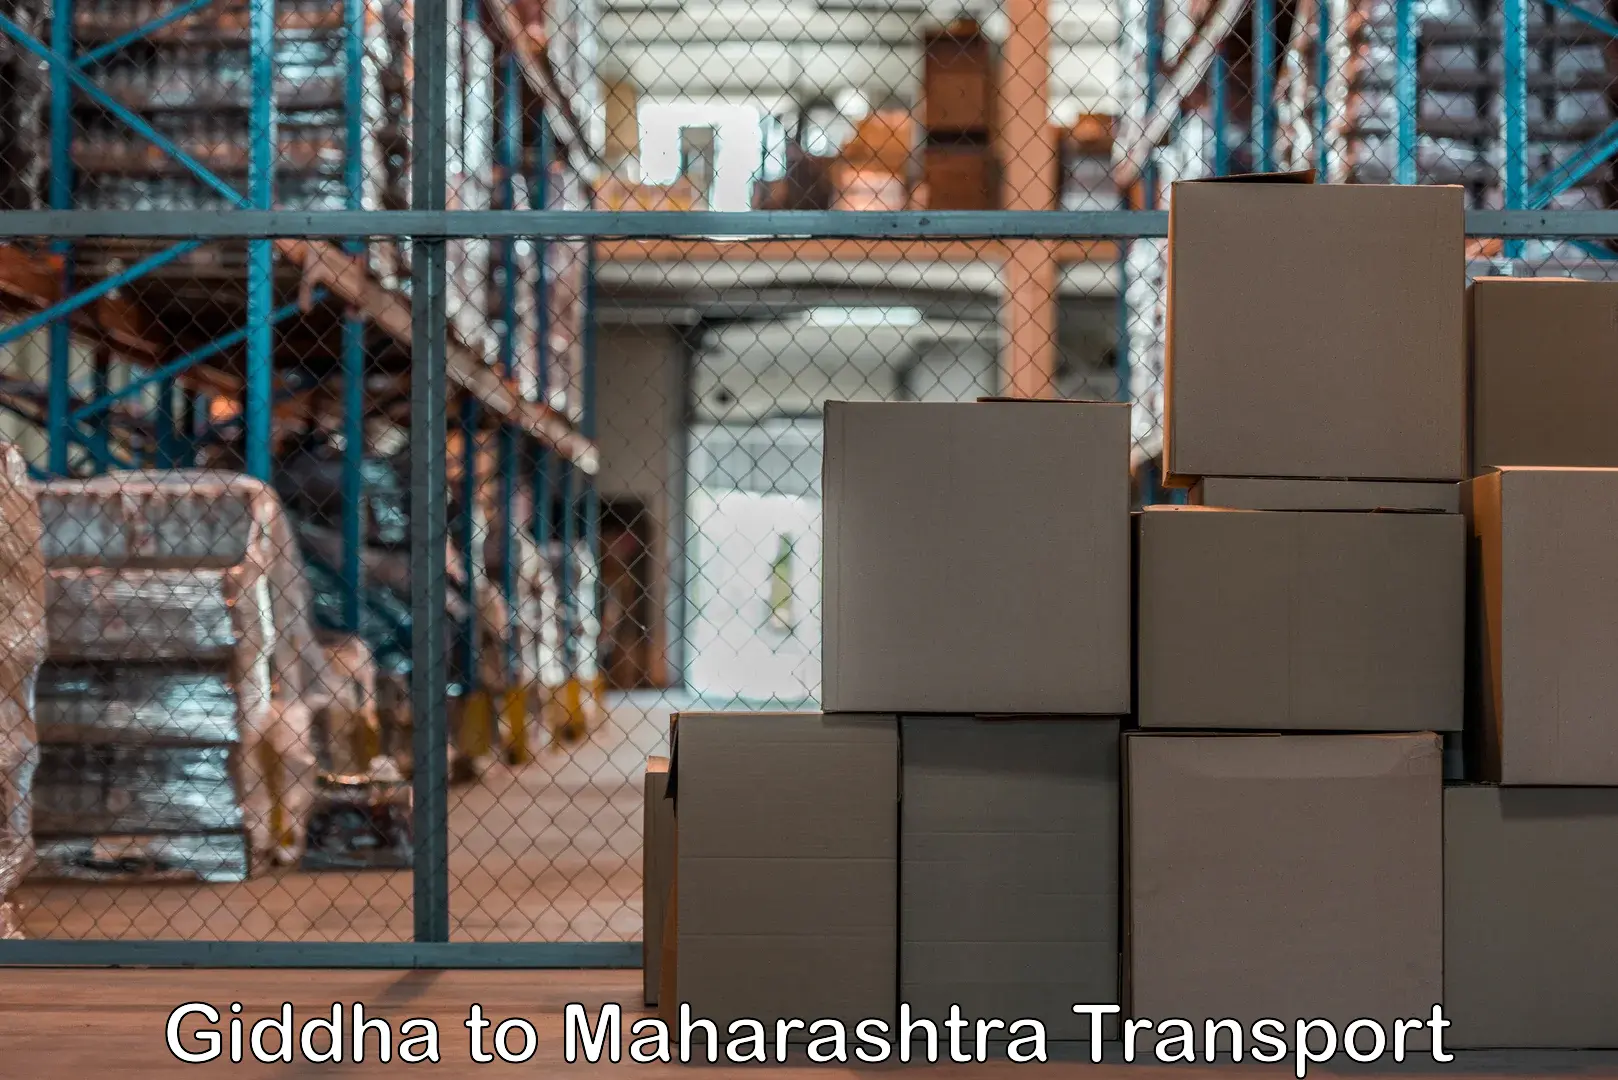 Cargo transport services in Giddha to Wardha